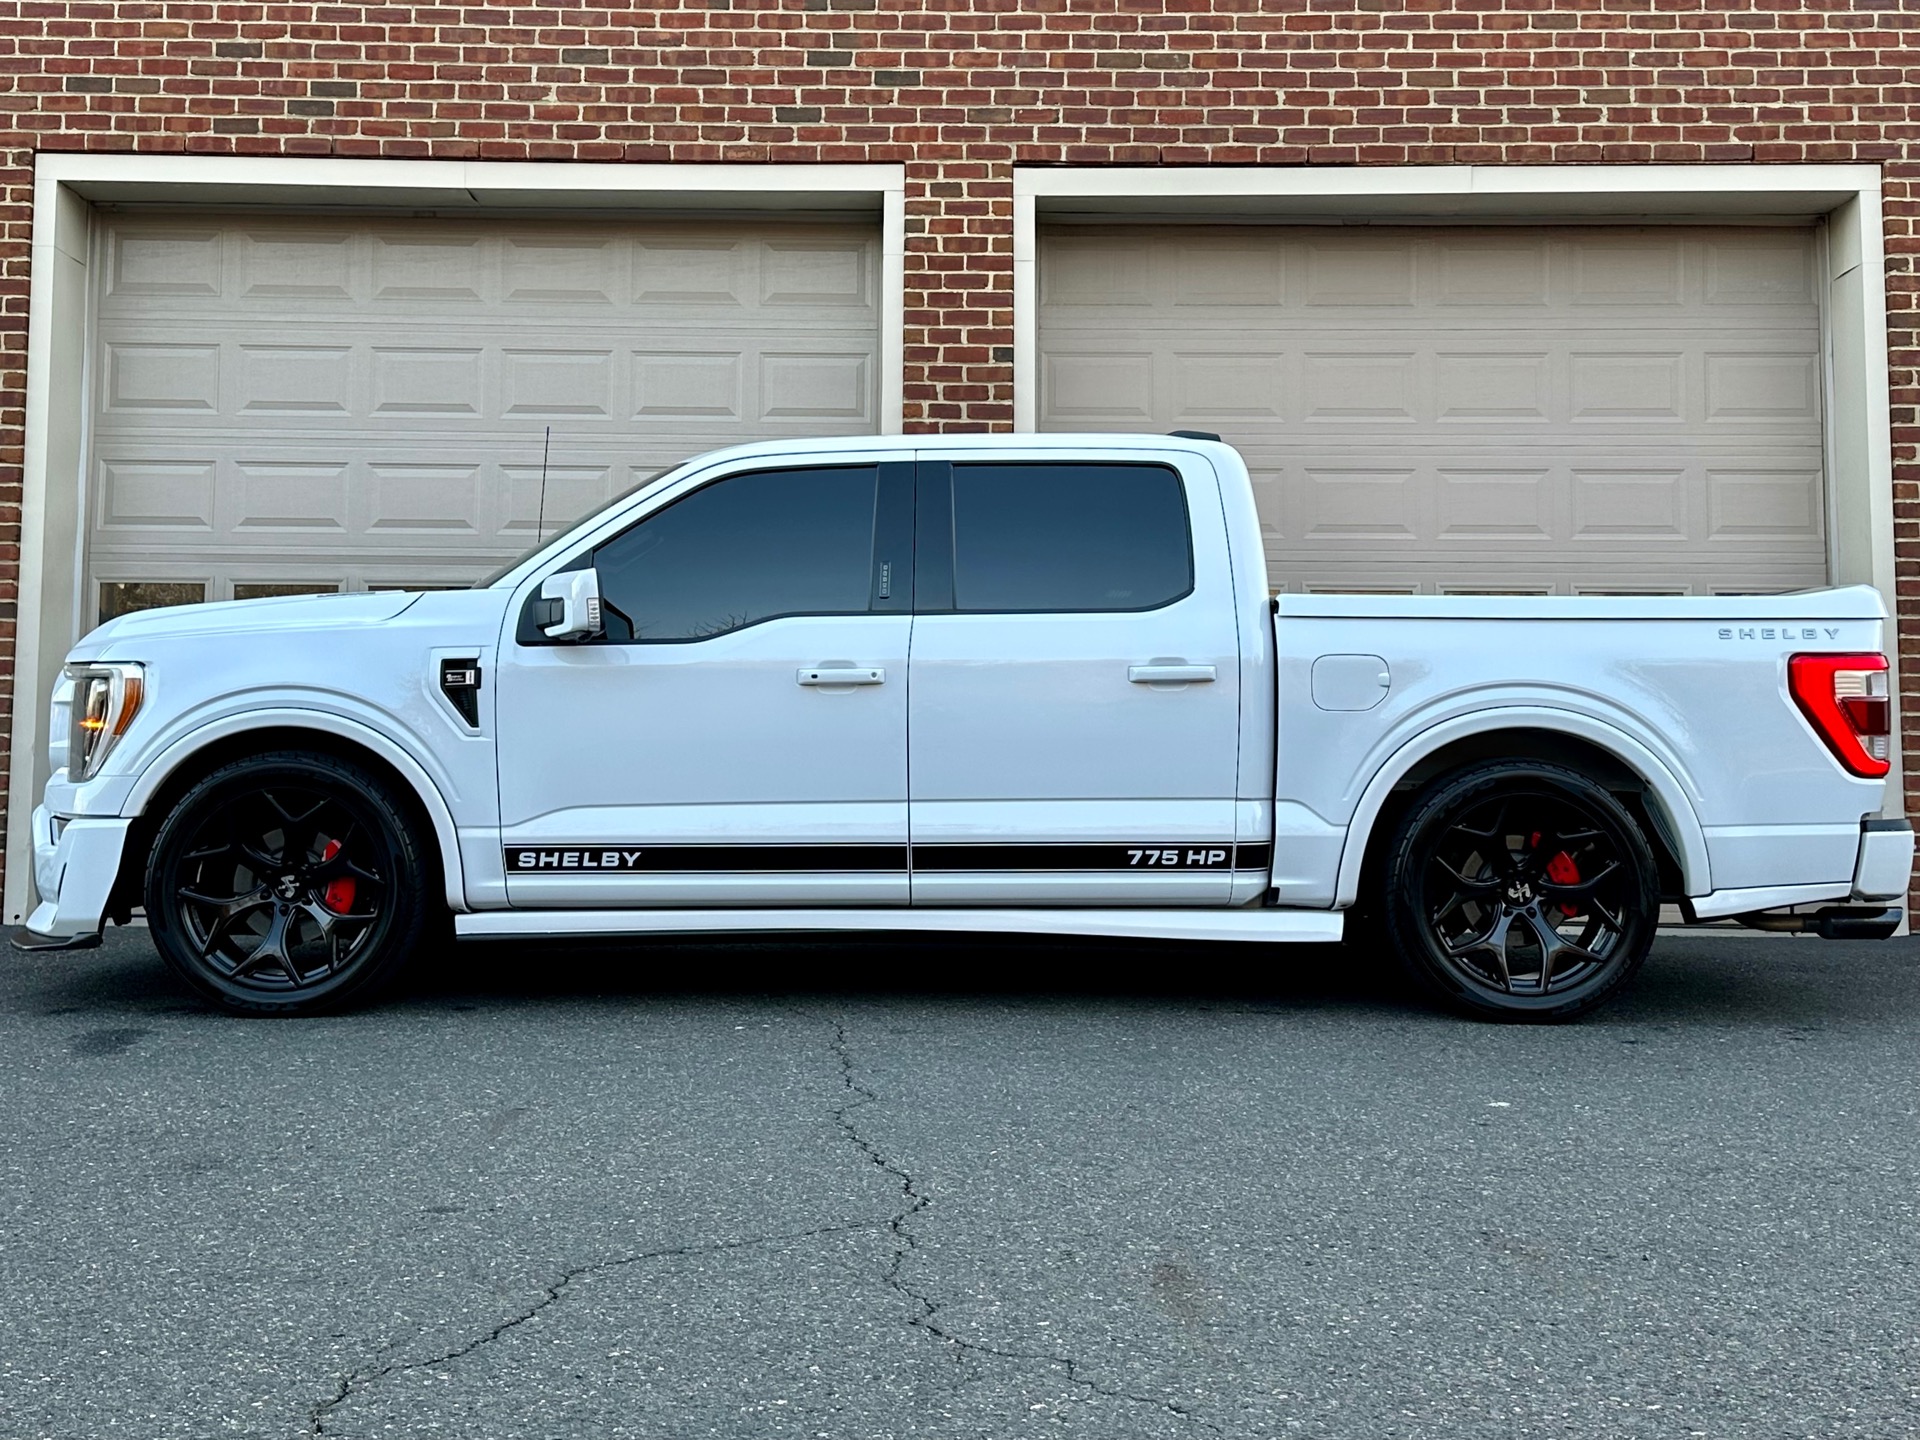 Used-2021-Ford-F-150-Lariat-Shelby-Super-Snake